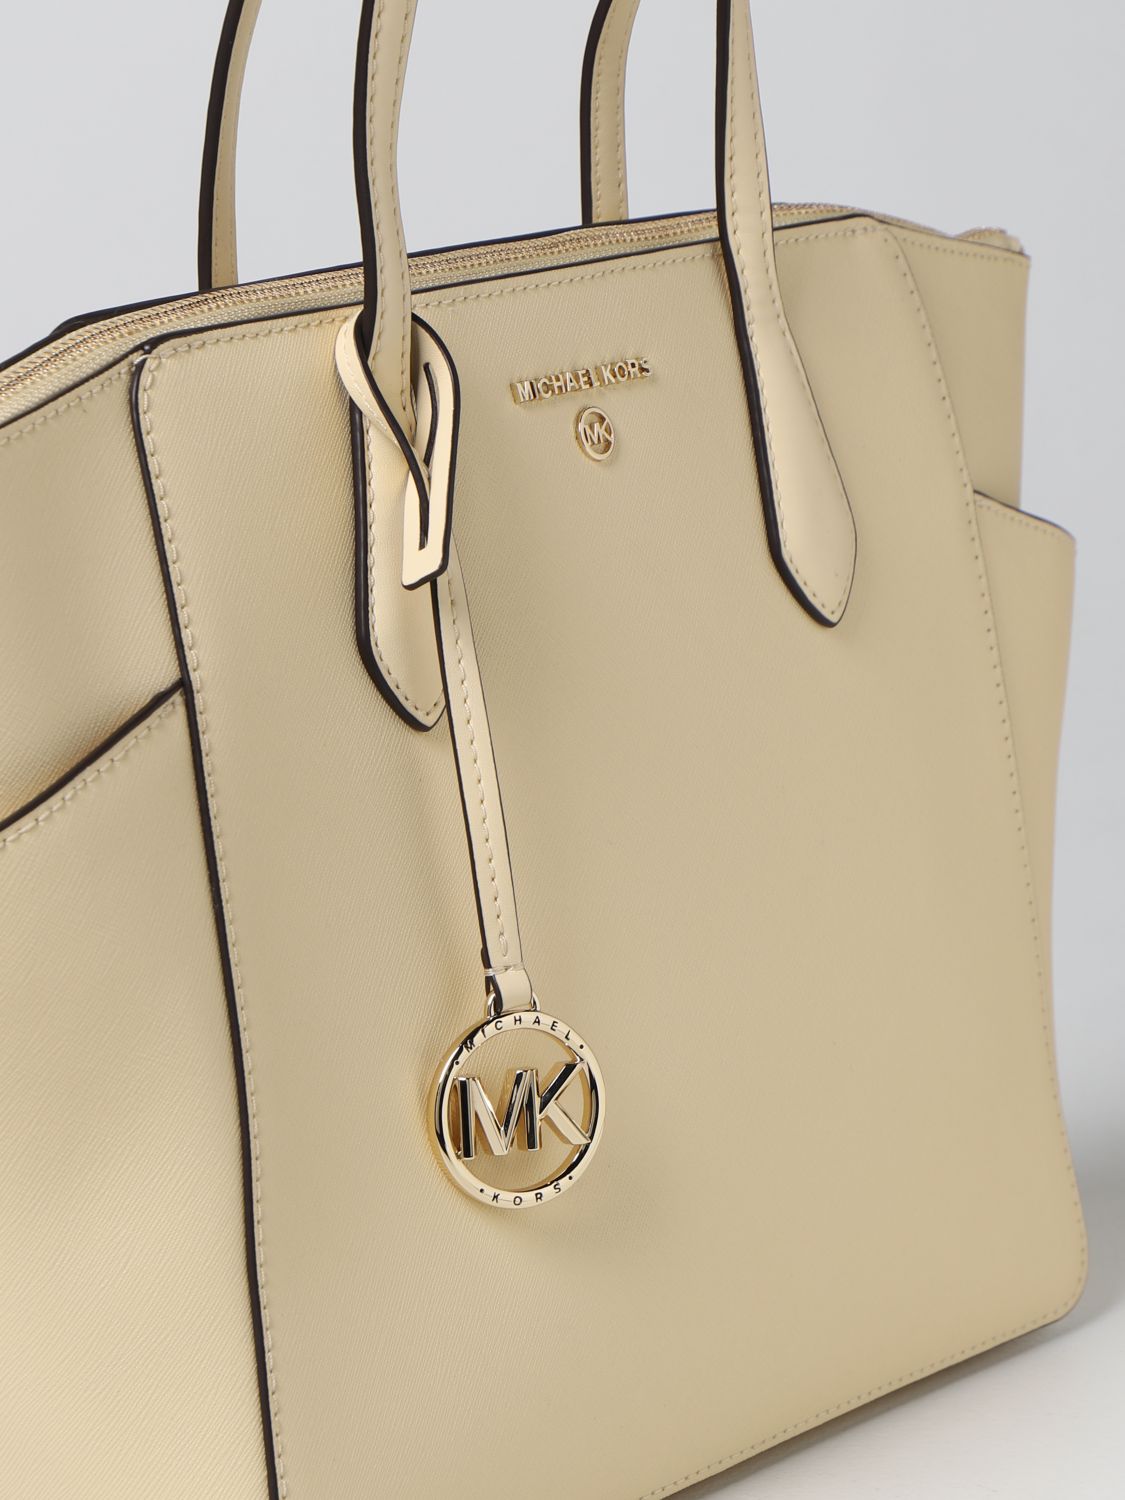 MICHAEL KORS: Mailyn Michael leather bag - Yellow | Michael Kors tote bags  30S2L6AT2L online on 